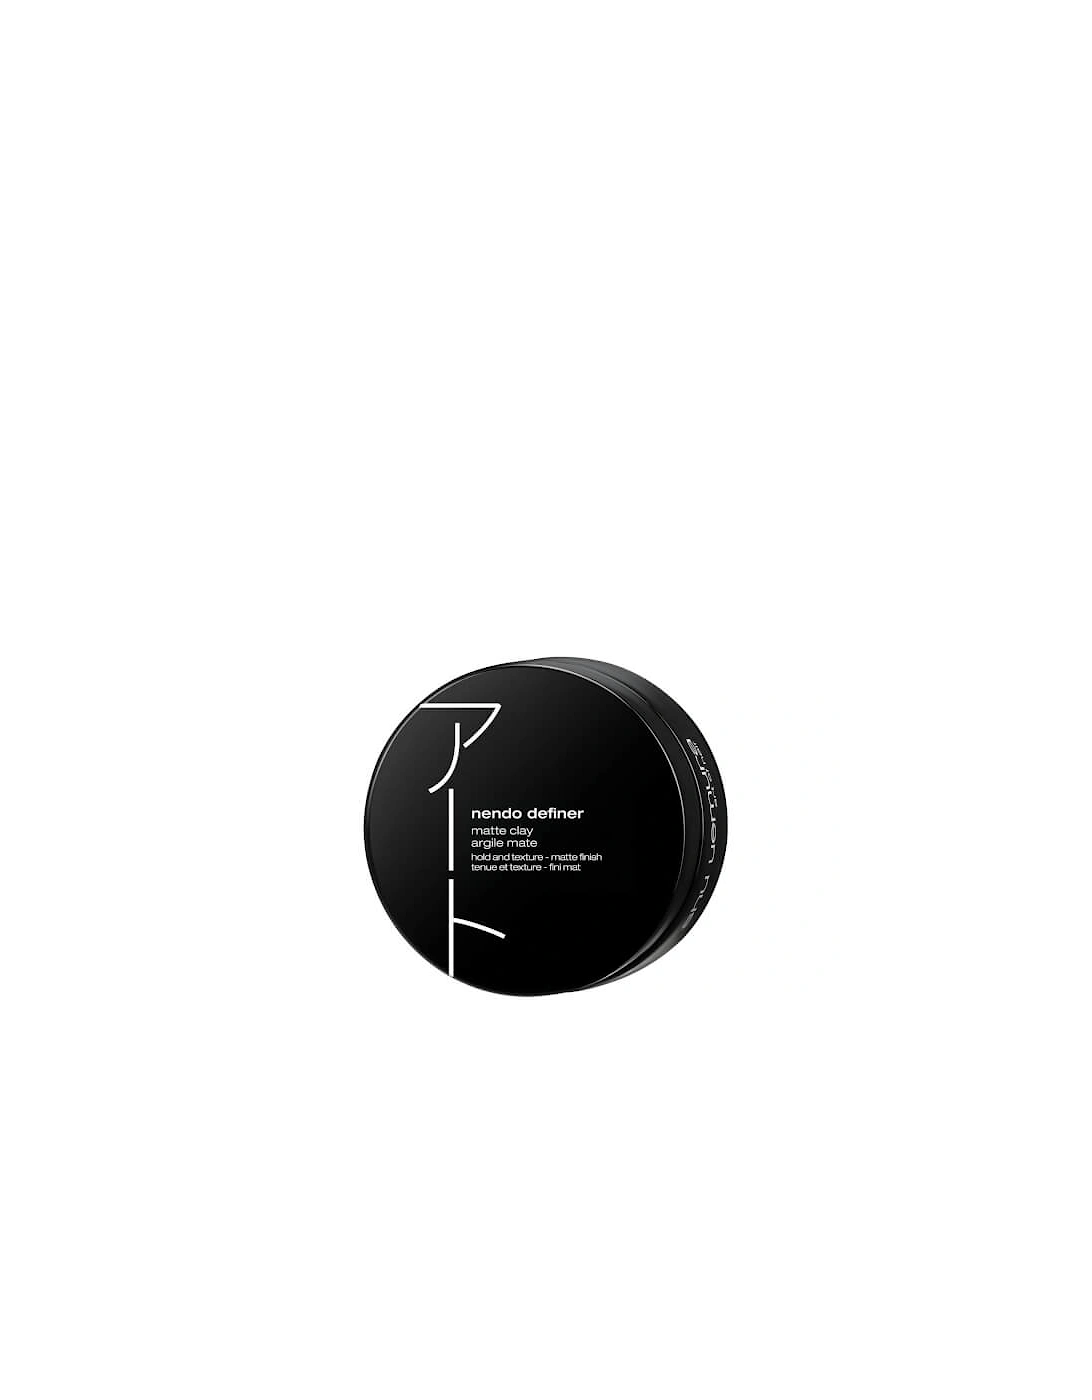 The Art Of Styling Nendo Definer Matte Clay 75ml, 2 of 1